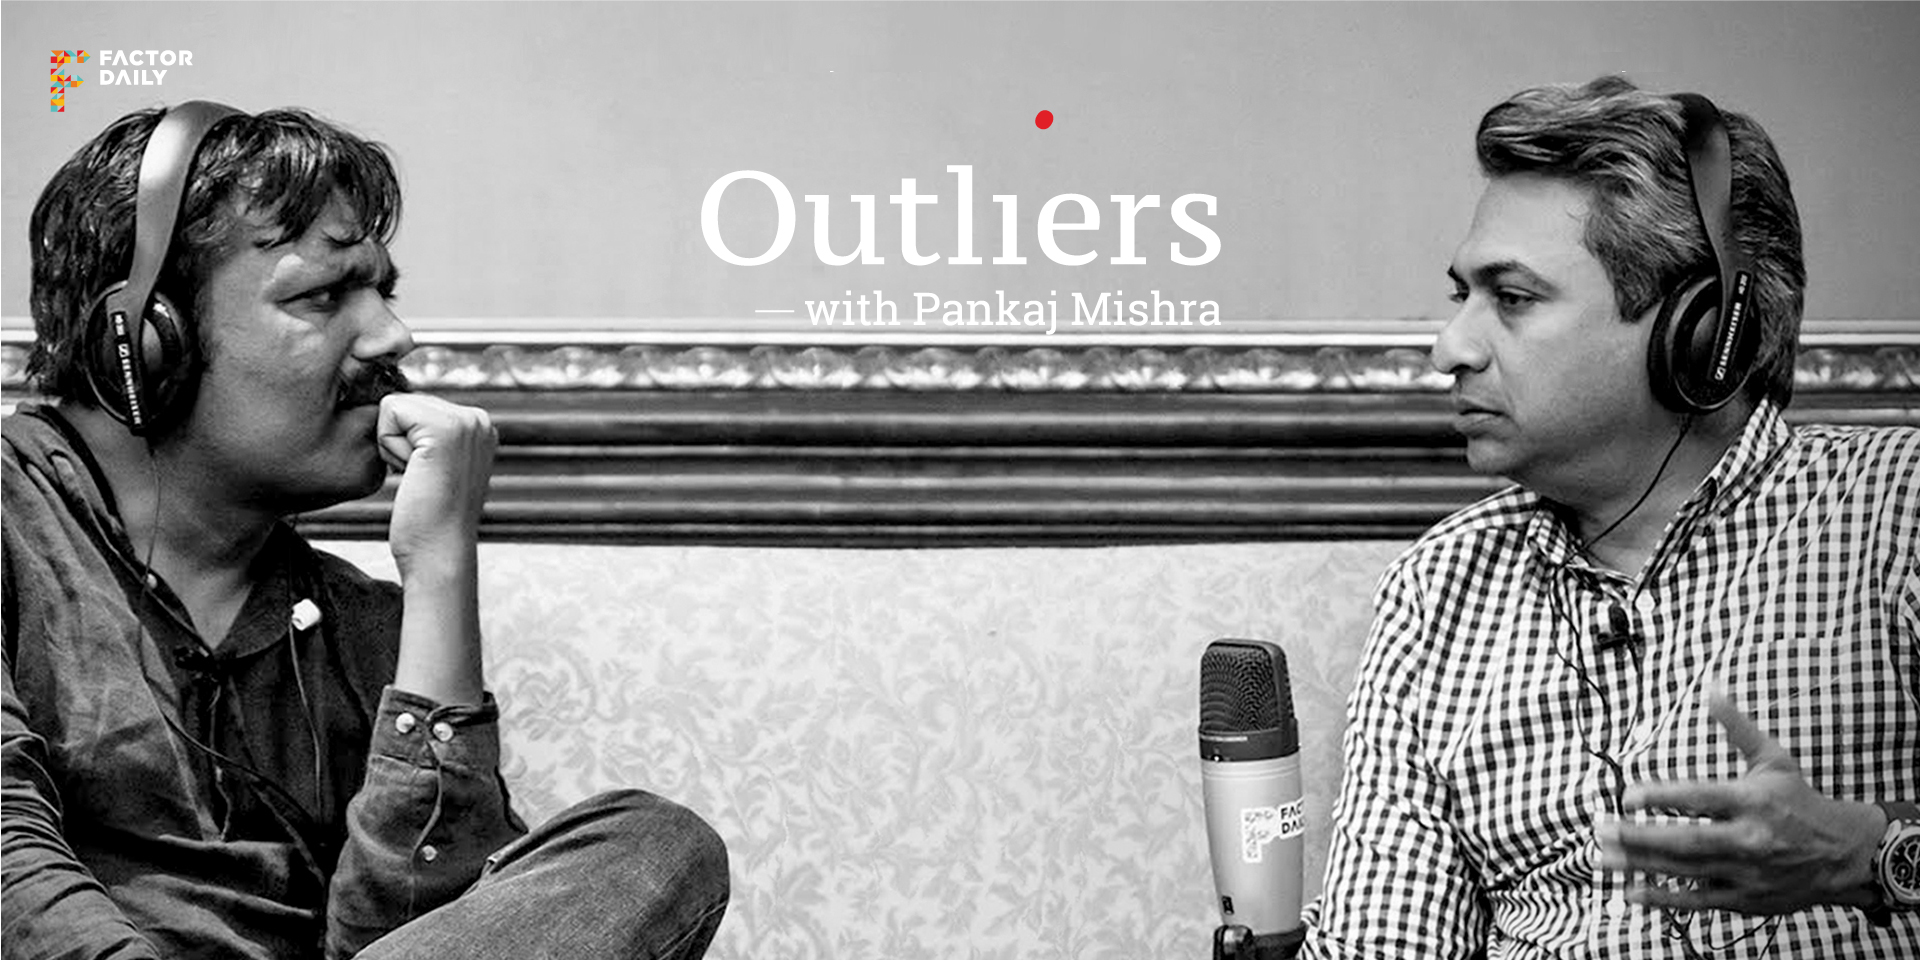 Rajan Anand, Google’s vice-president for Southeast Asia and India, with Pankaj Mishra, CEO, FactorDaily, in Outliers